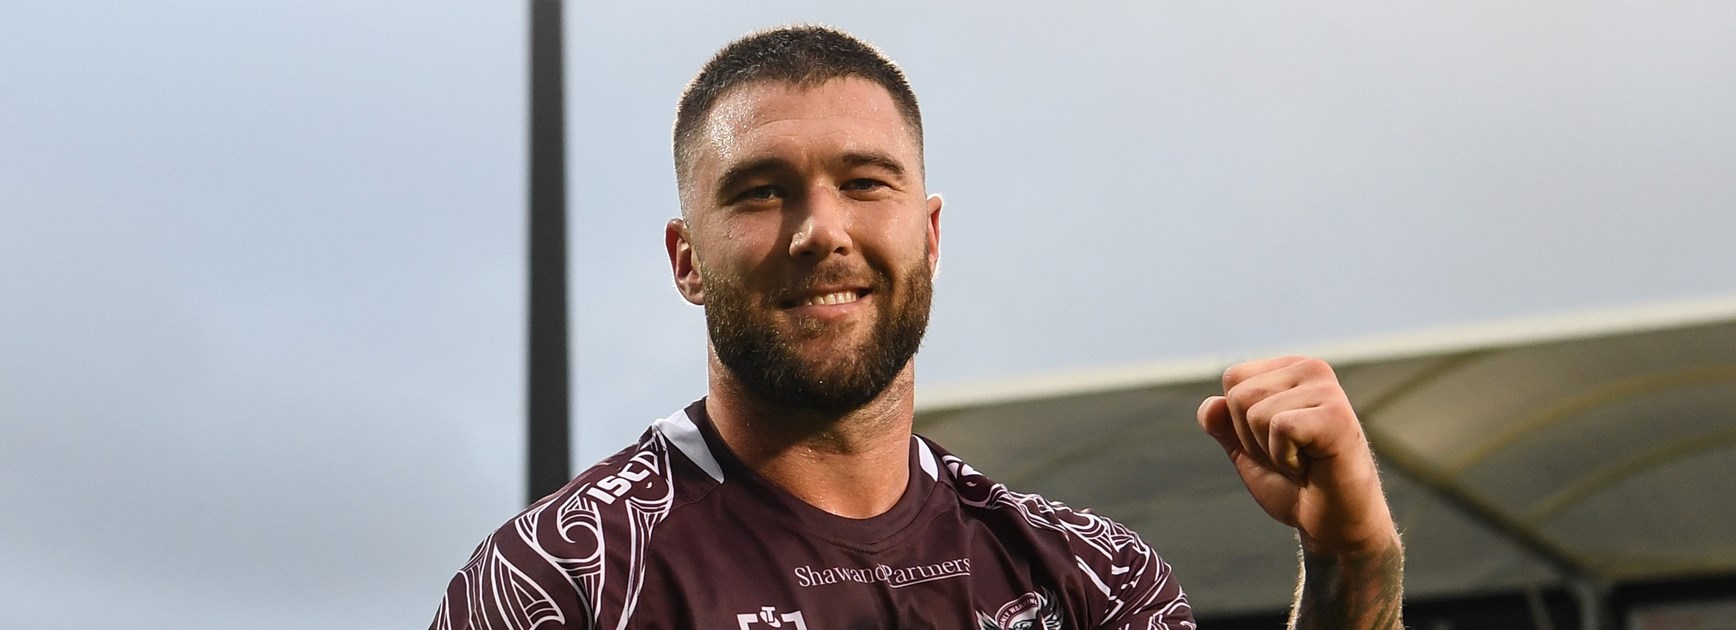 Sironen expects combination with DCE, Suli to progress